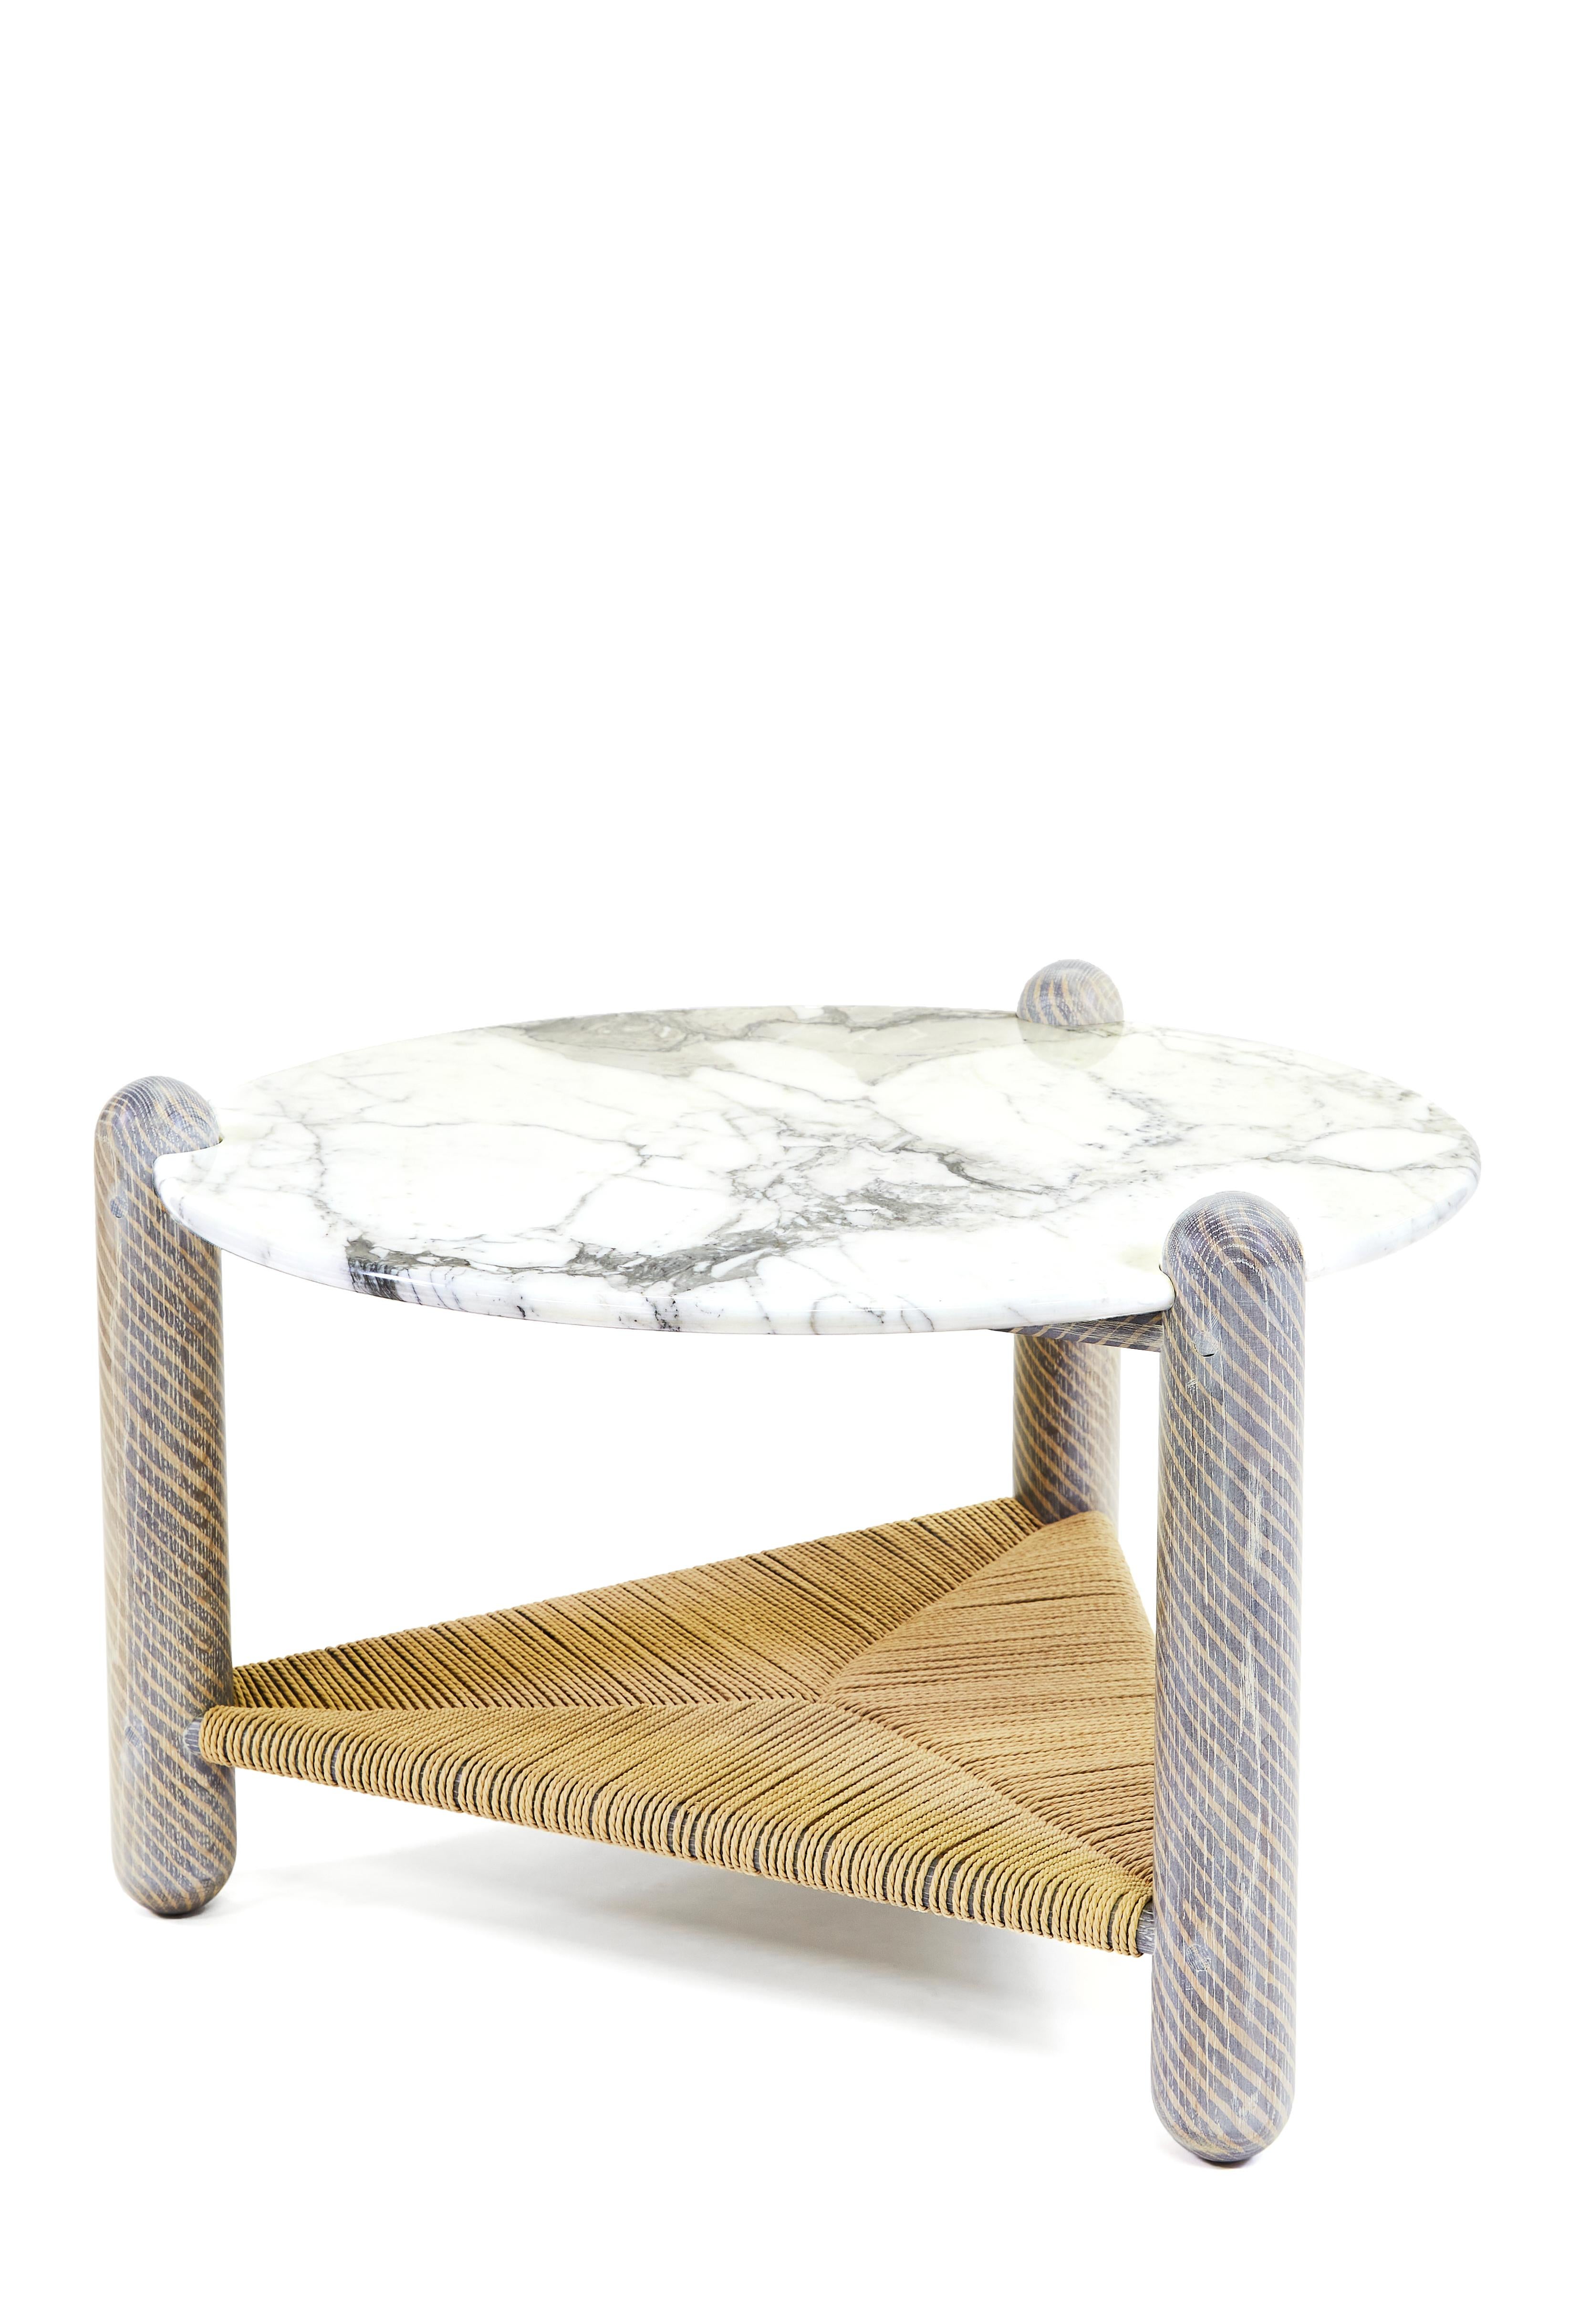 Captain's coffee table by Hamilton Holmes
Oxalino Collection 
Dimensions: 30”D x 18”H
Materials: White oak, Calcatta marble, natural Danish cord and oxidized treatment

These solid oak three-legged tables feature handwoven Danish cord lower